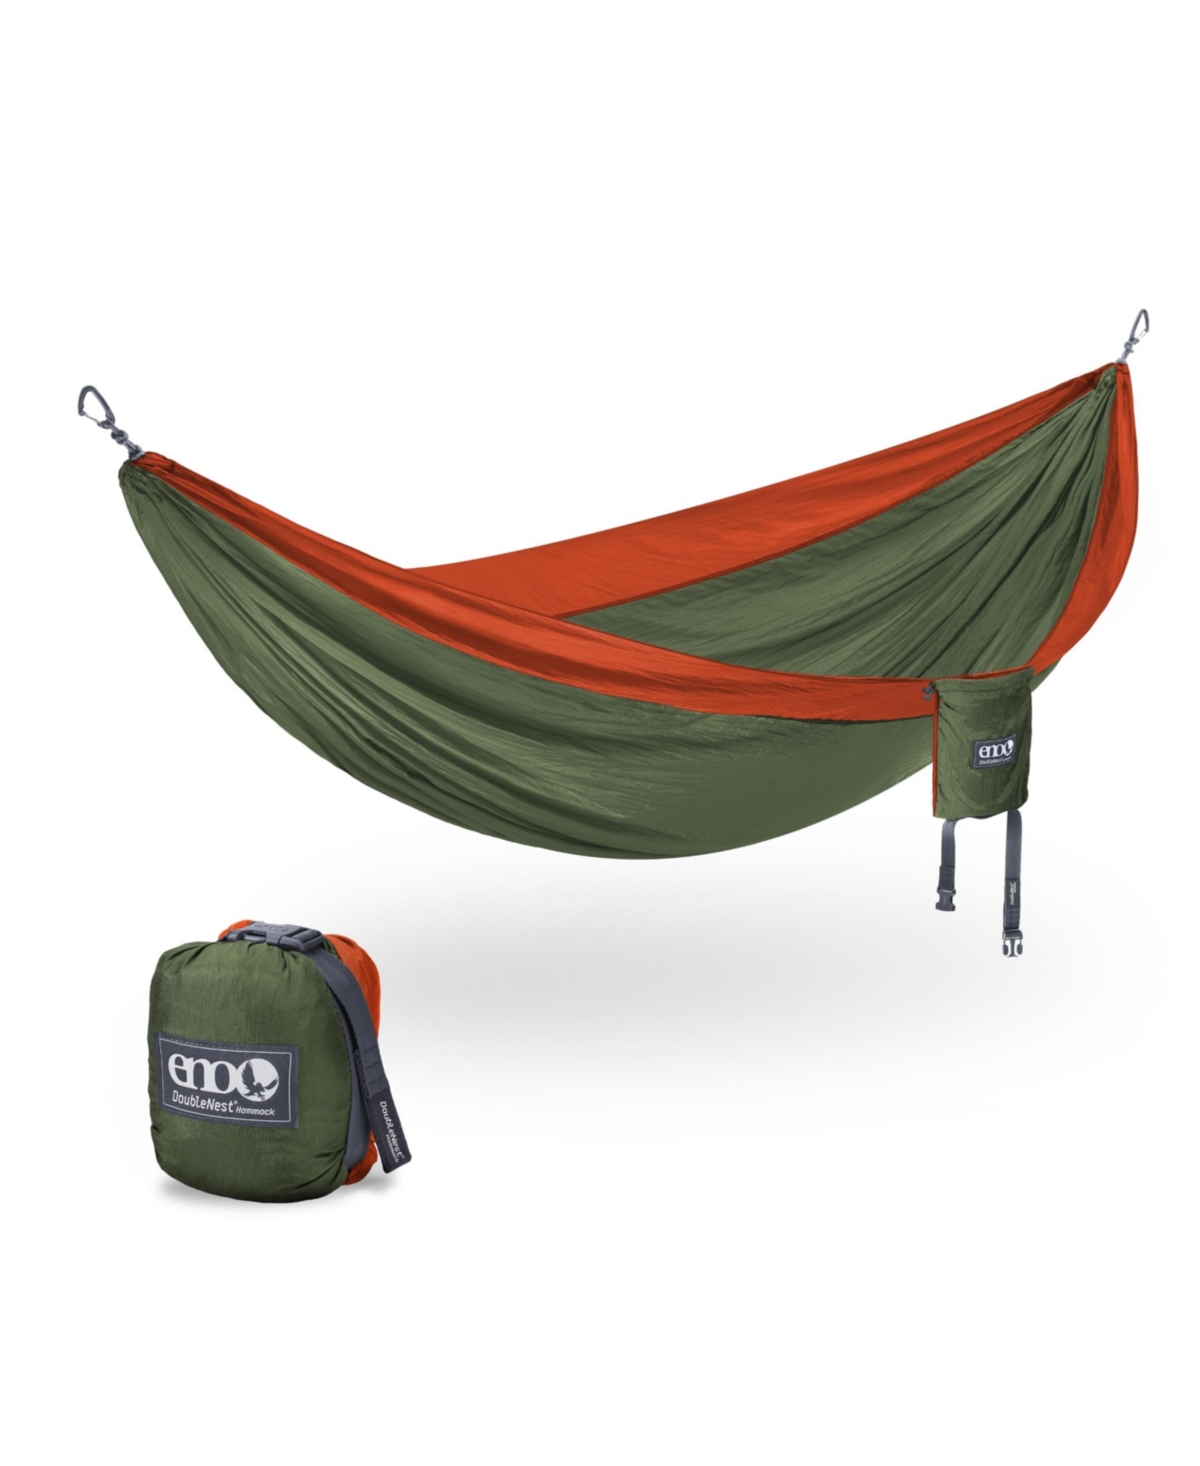 DoubleNest Hammock - Lightweight, Portable, 1 to 2 Person Hammock - For Camping, Hiking, Backpacking, Travel, a Festival, or the Beach - Olive/Ora